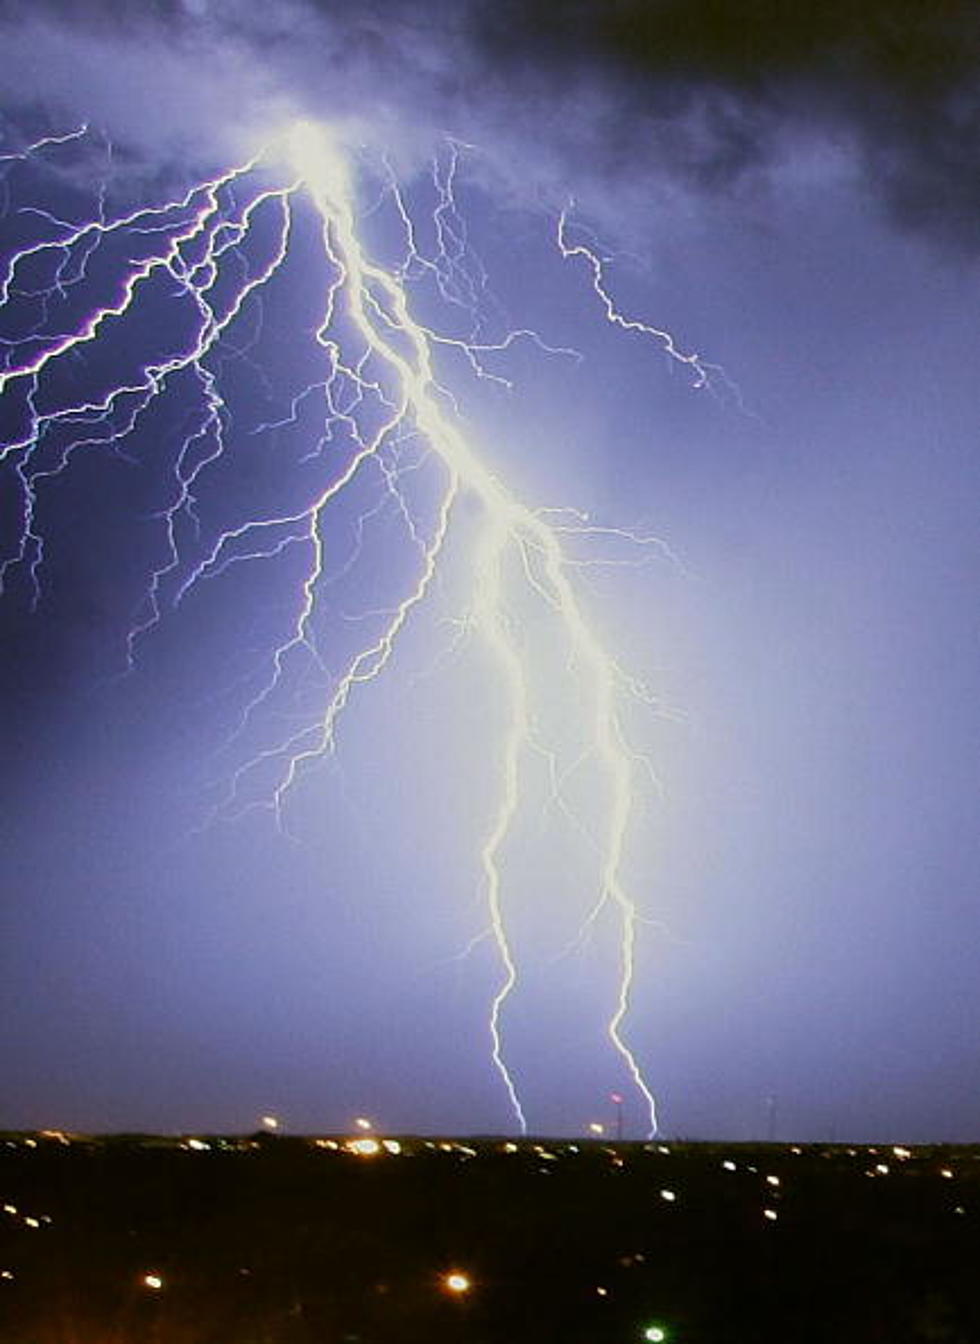 Facts About Lightning That May “Shock” You